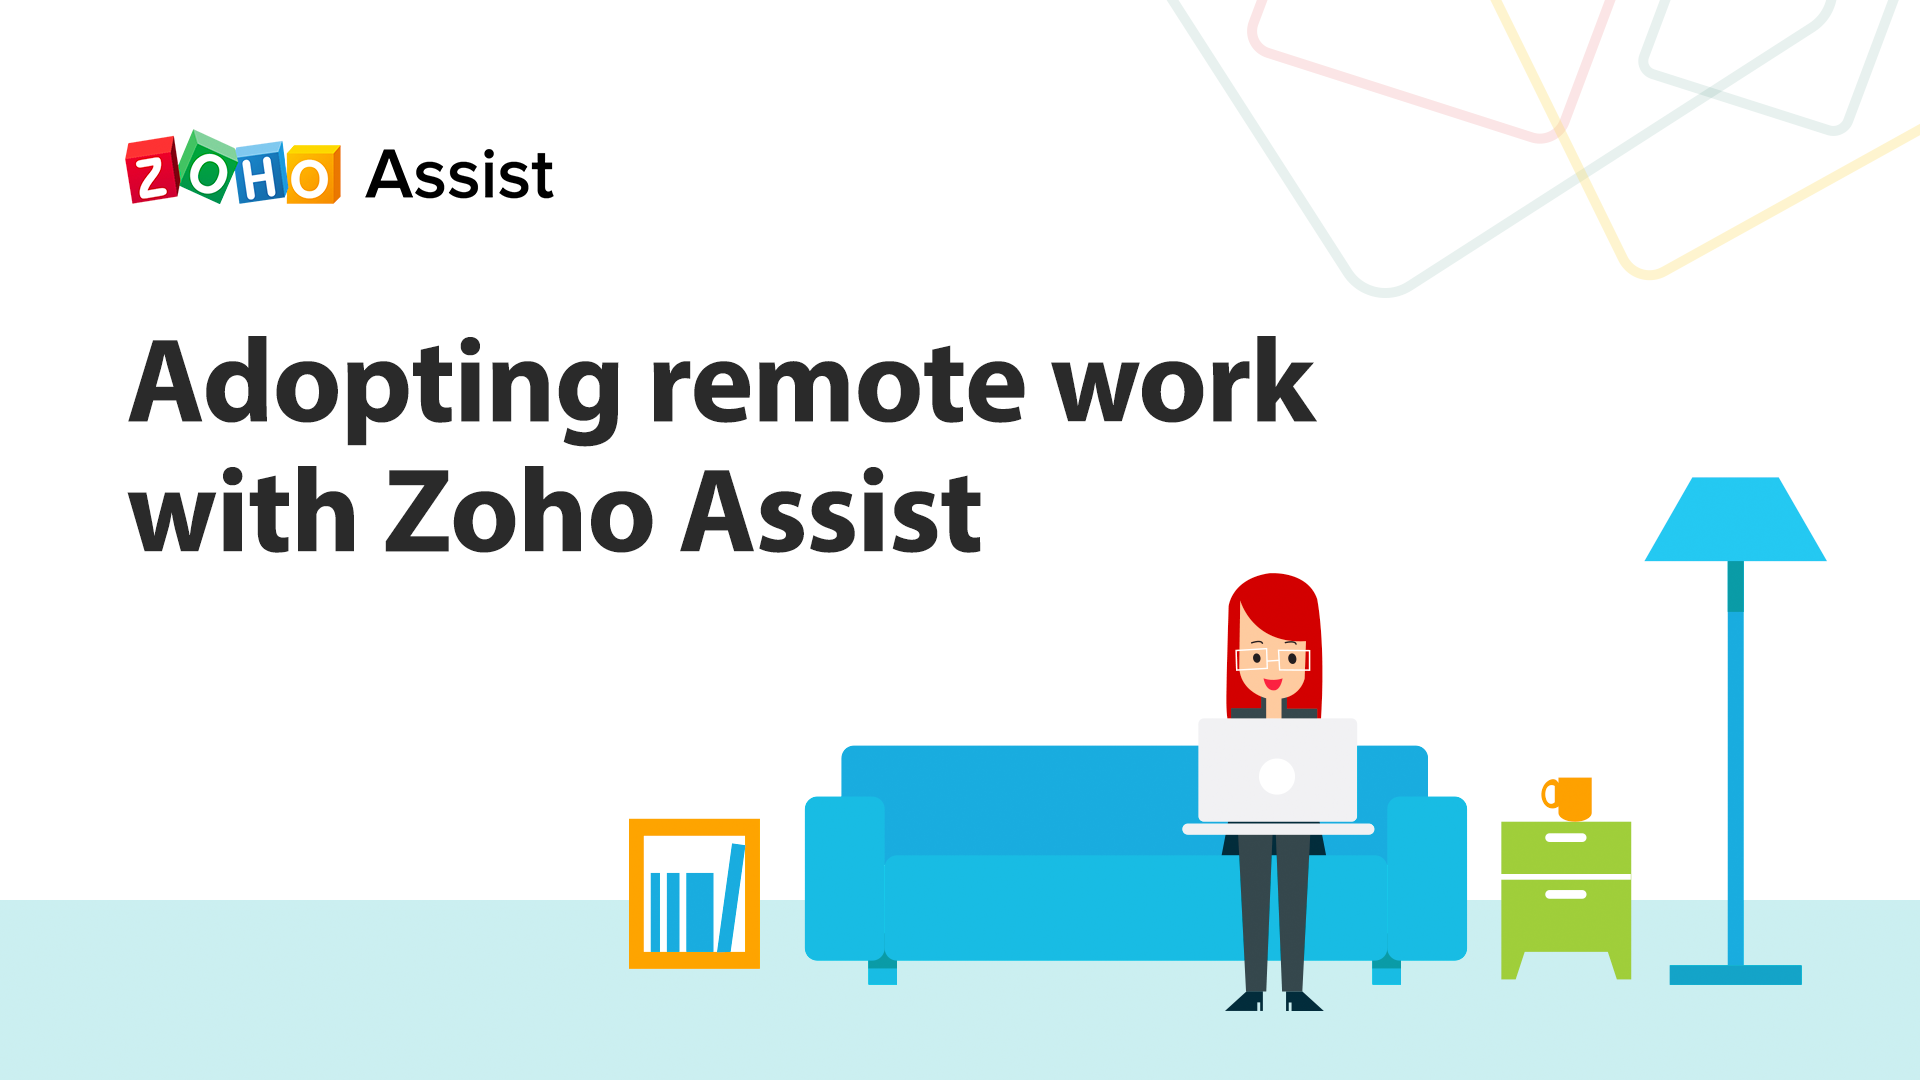 Adopting remote work with Zoho Assist: Extending 60-day free licenses with all premium features.